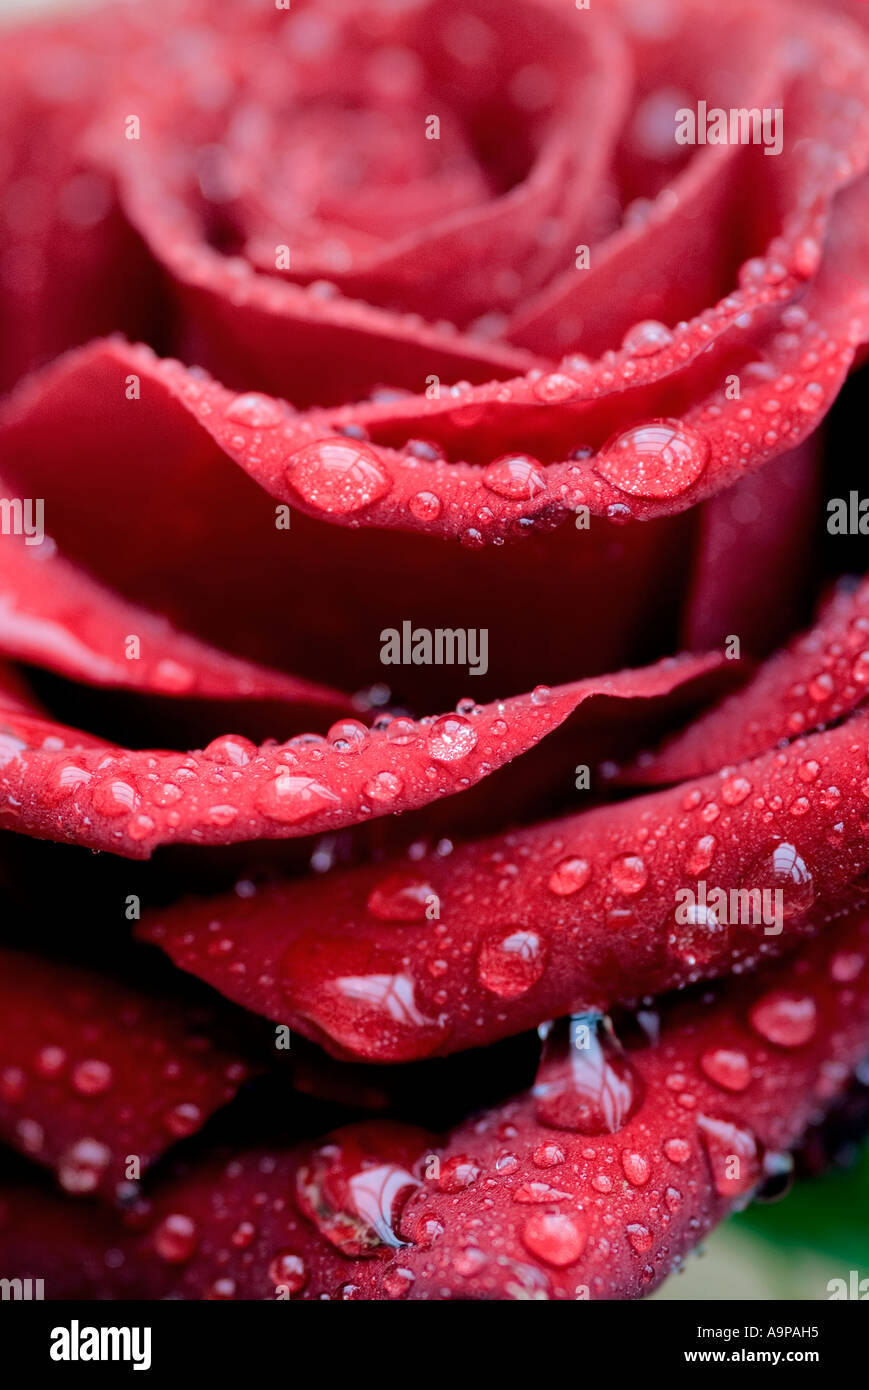 Raindrops on red rose petals Stock Photo